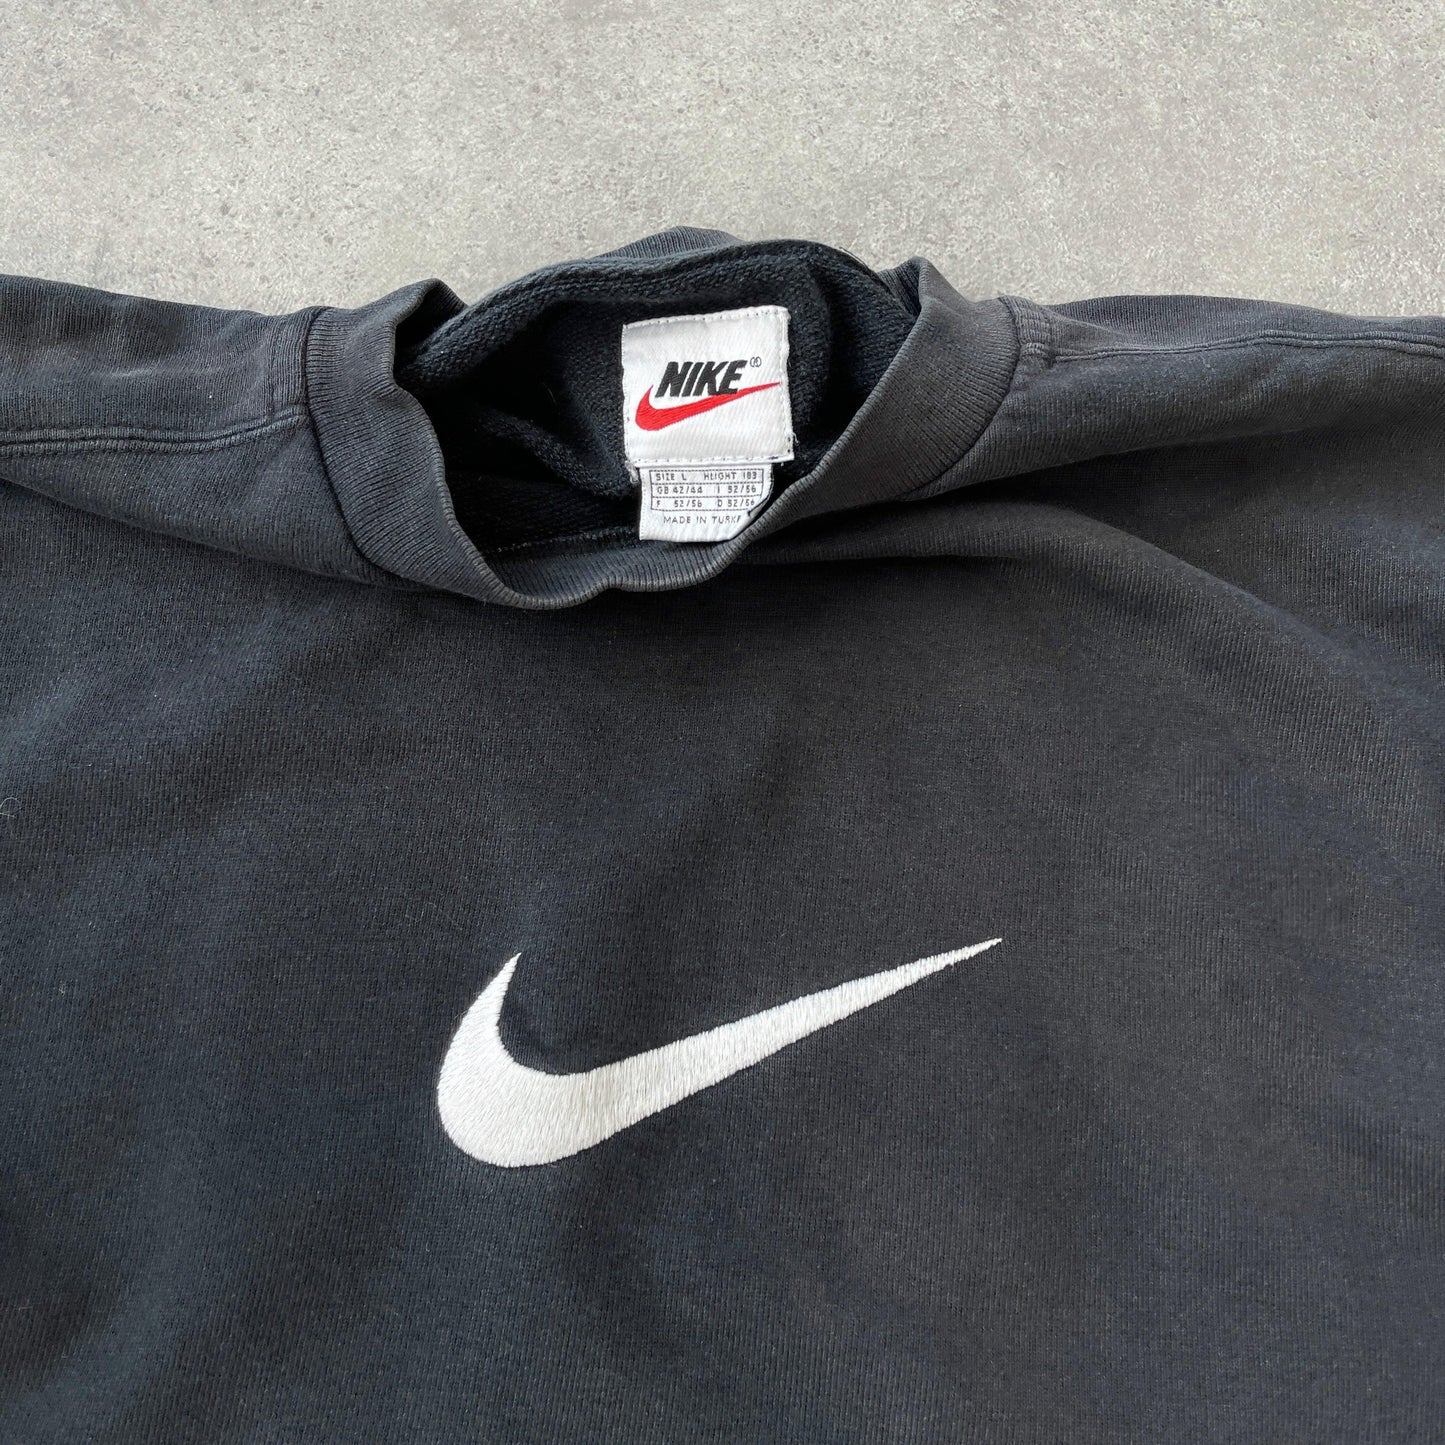 Nike 1990s heavyweight embroidered sweatshirt (L) - Known Source